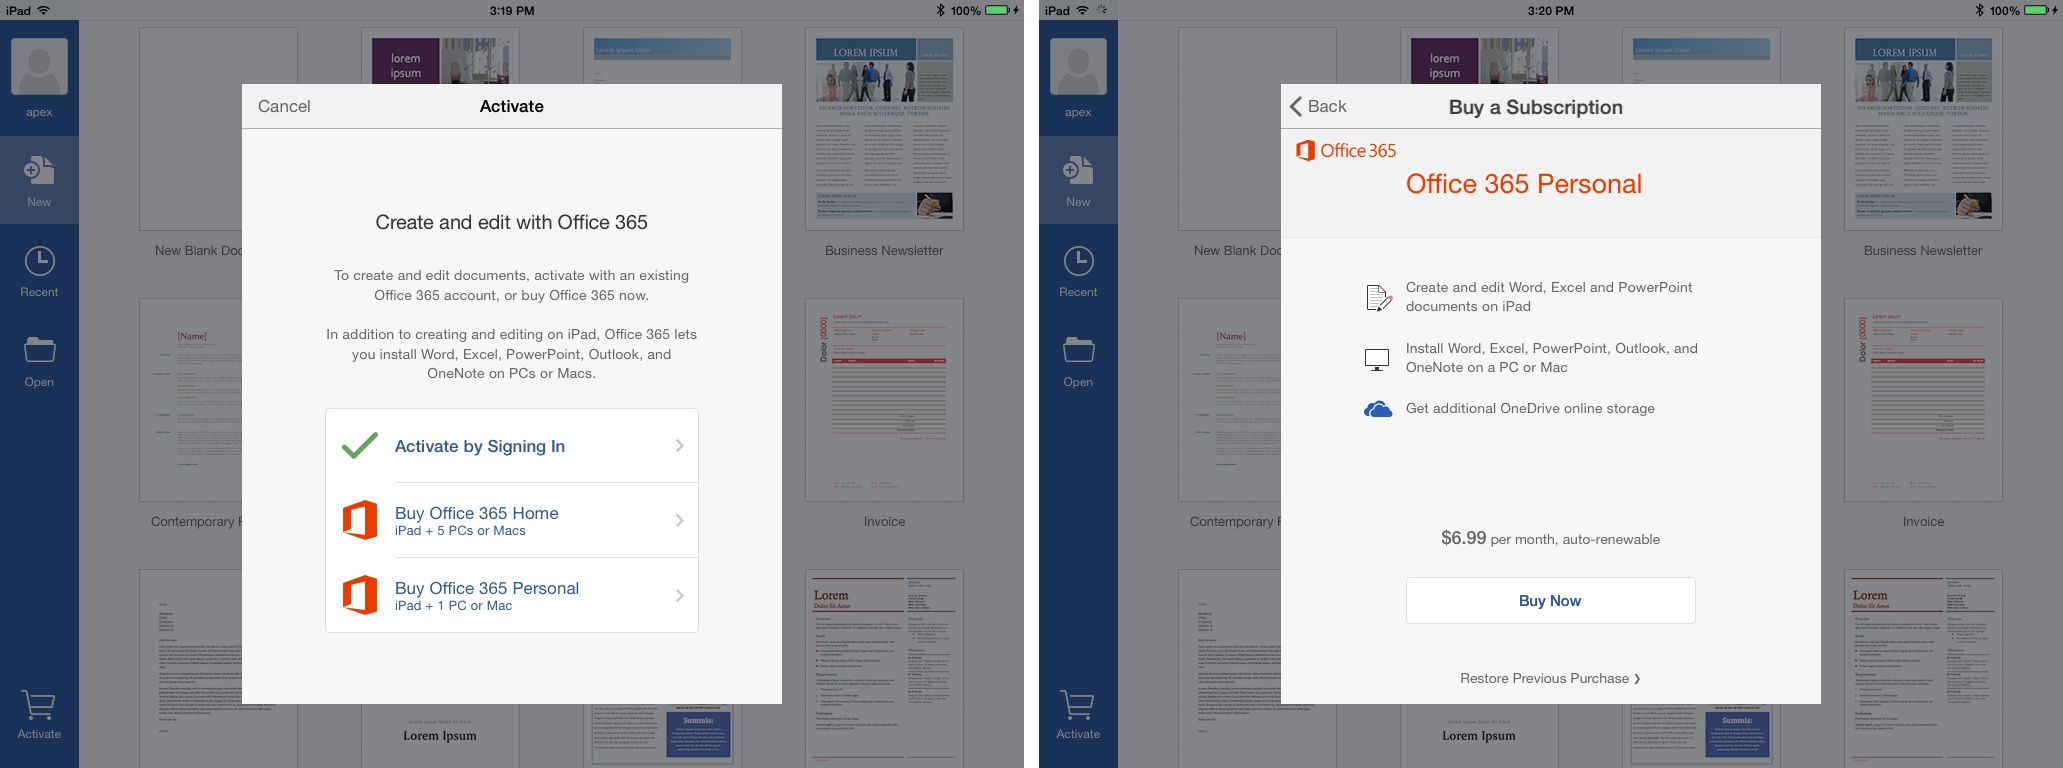 photo of Microsoft updates Office for iPad apps with more affordable monthly subscriptions image